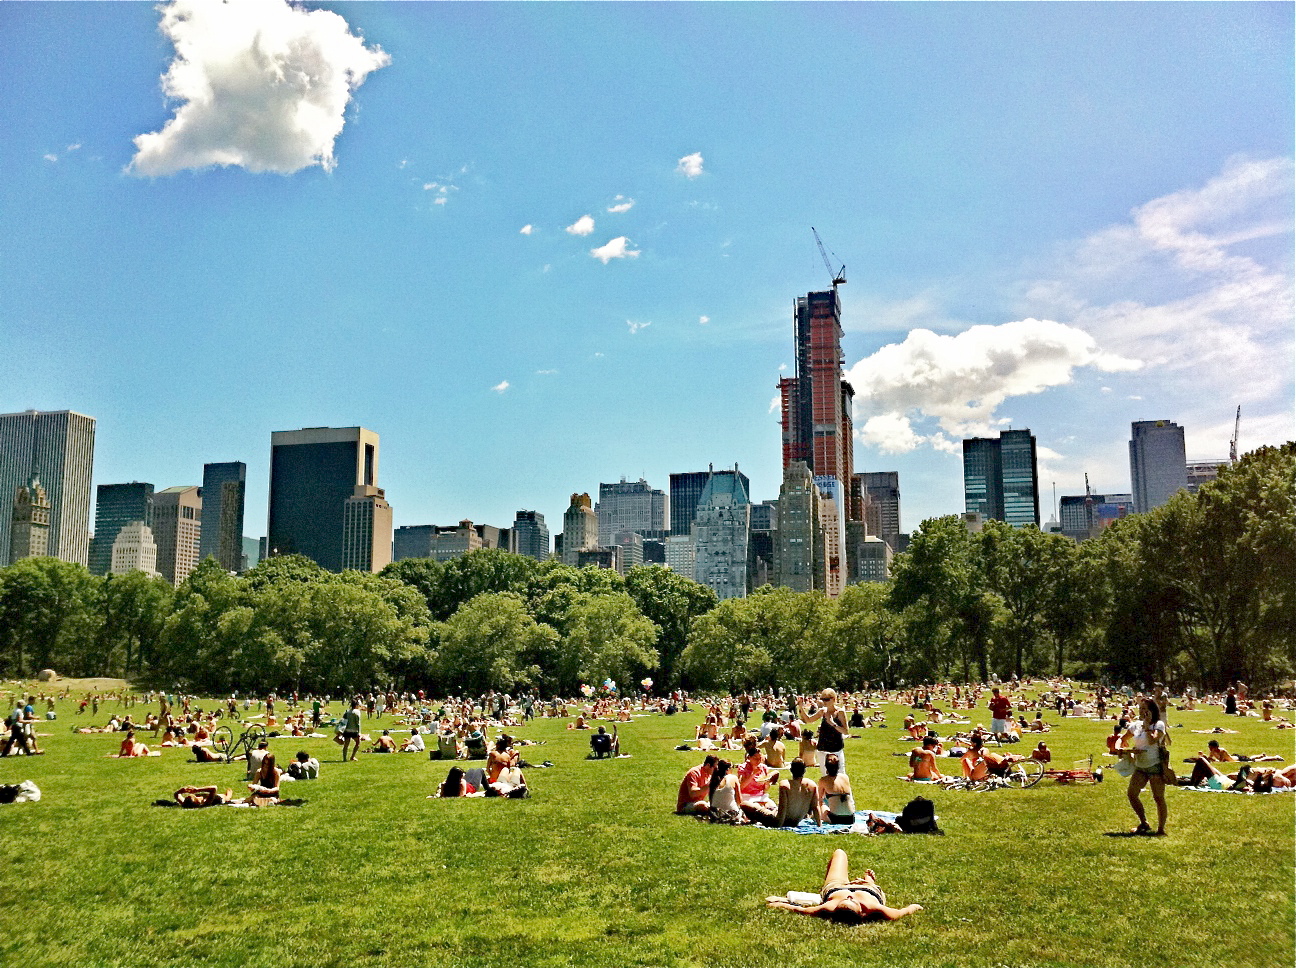 NYC ♥ NYC: Sunbathers, Picnickers and Frisbee Players at Sheep Meadow